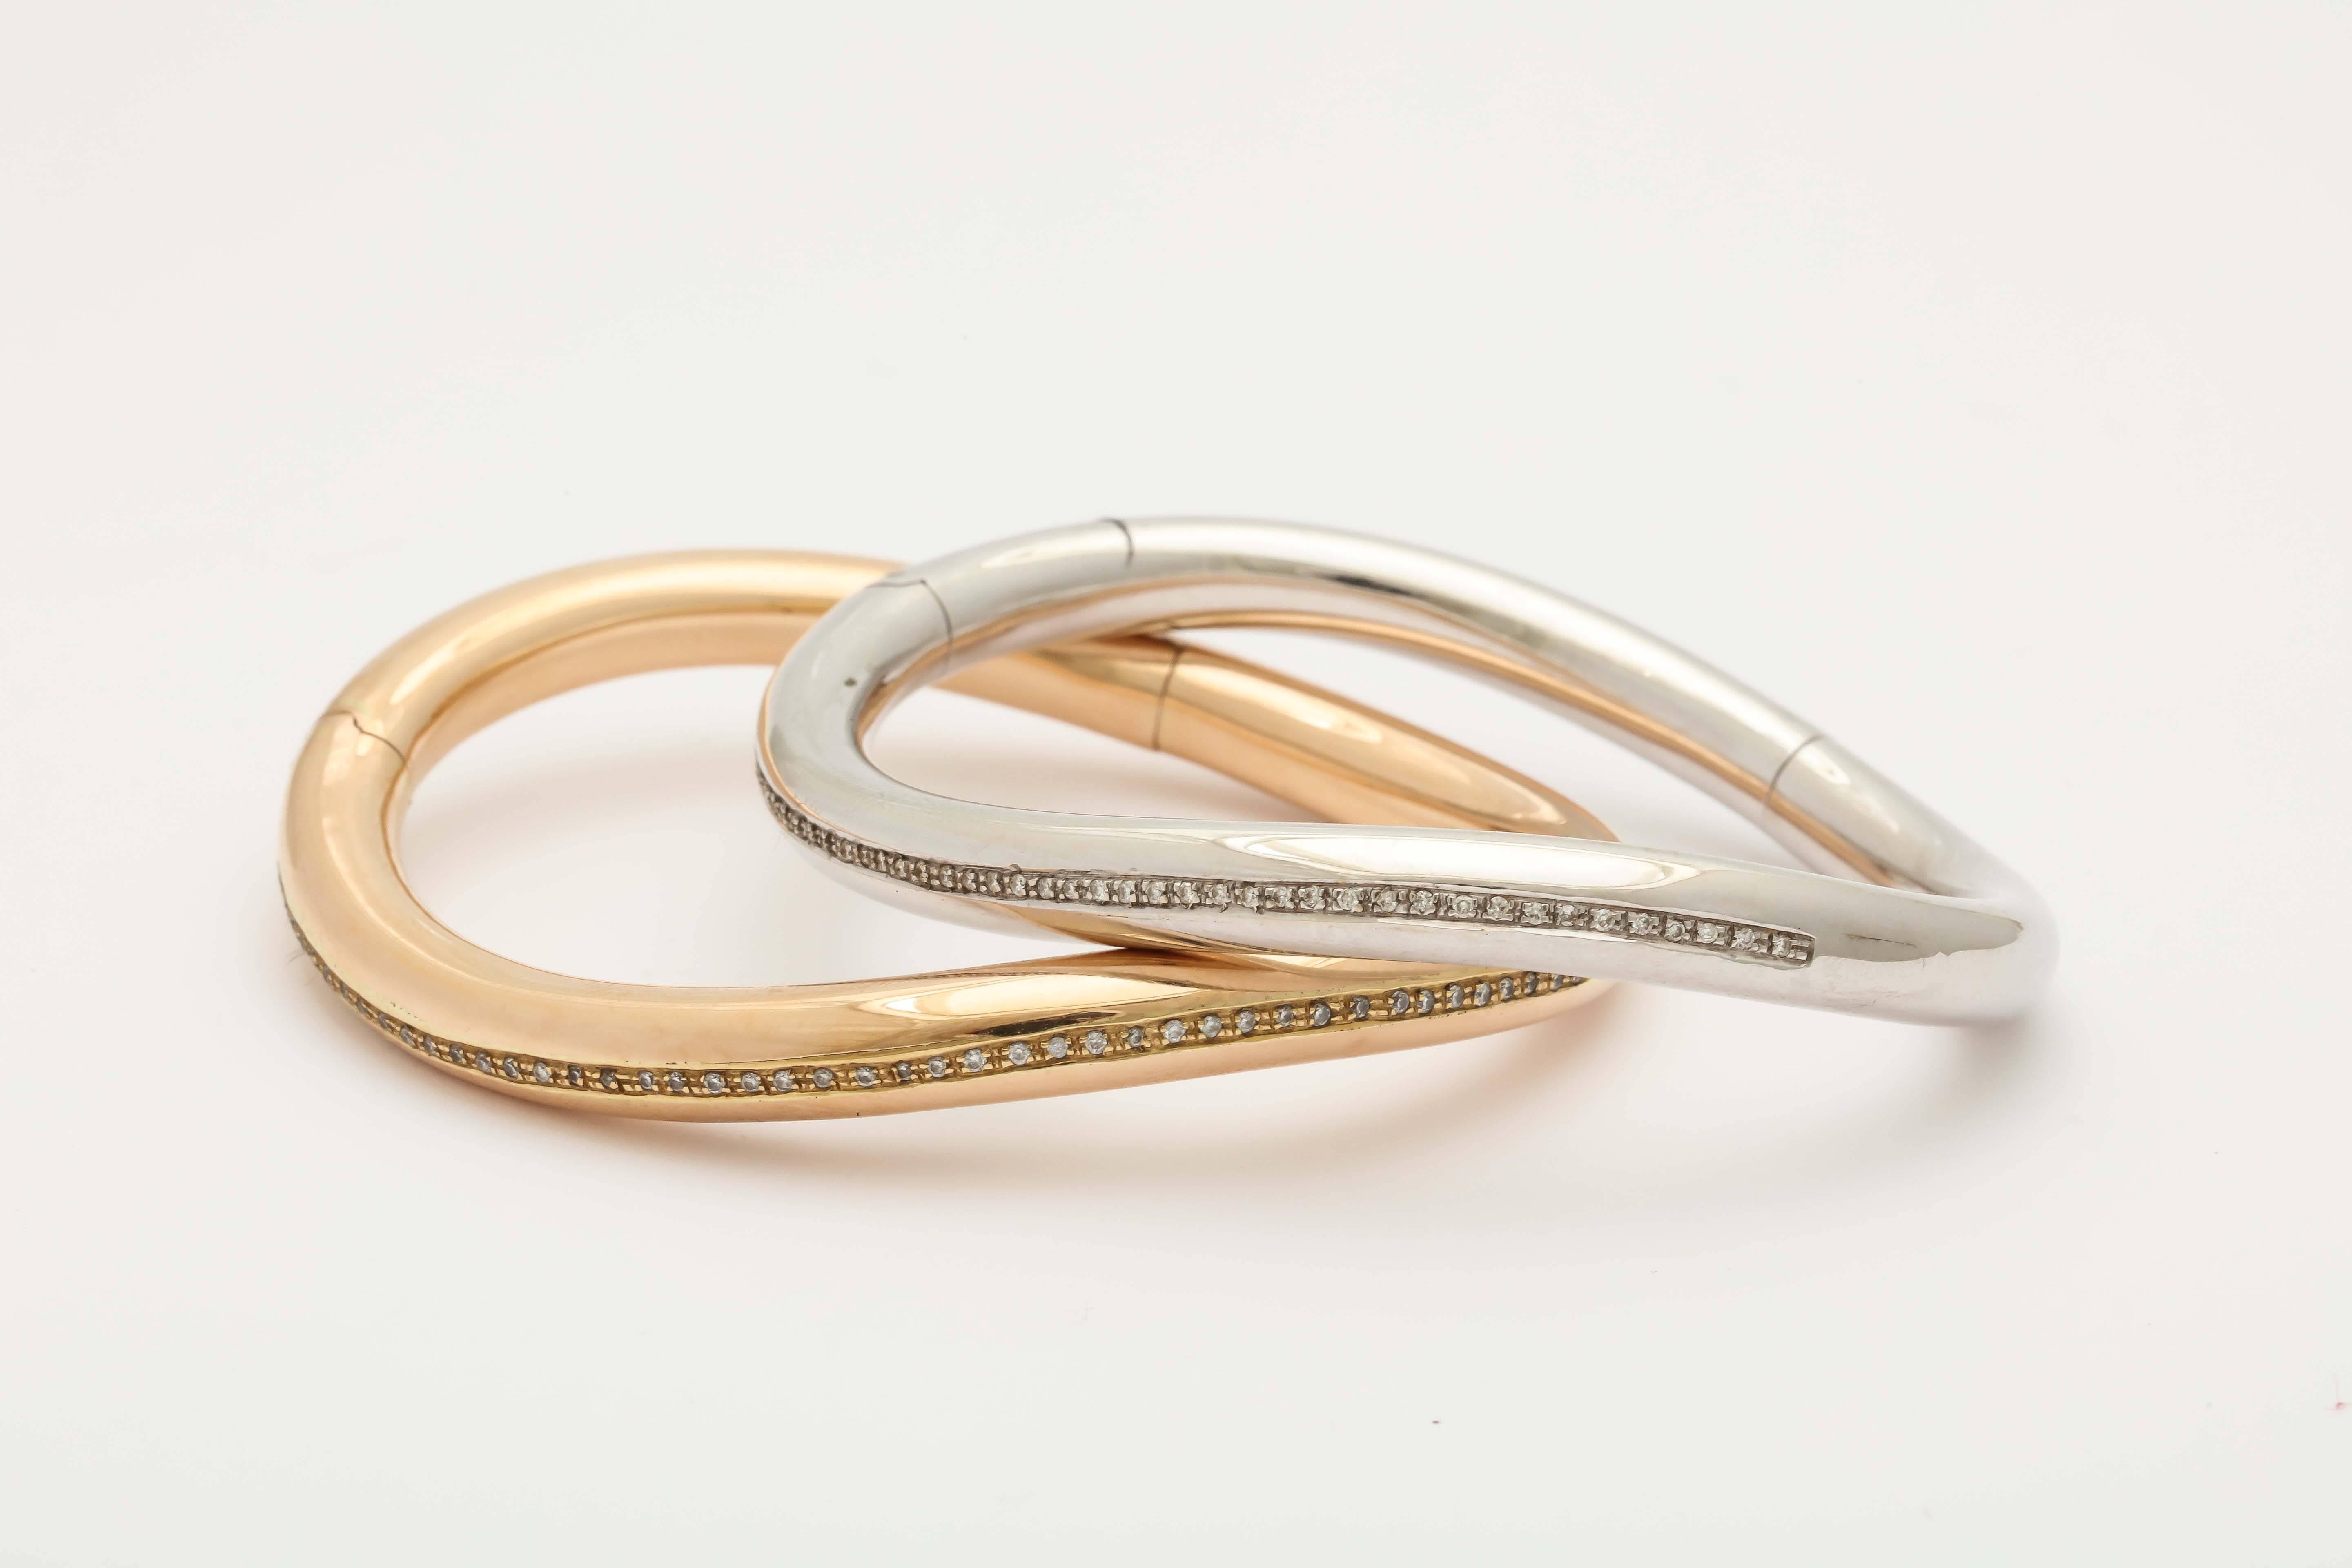 Pair Of 18kt Gold White And Rose Gold Bangles With 2 Stripes of Diamonds Weighing Approximately 1 carat total weight. Designed By Faraone Mennella. in the 1980's.